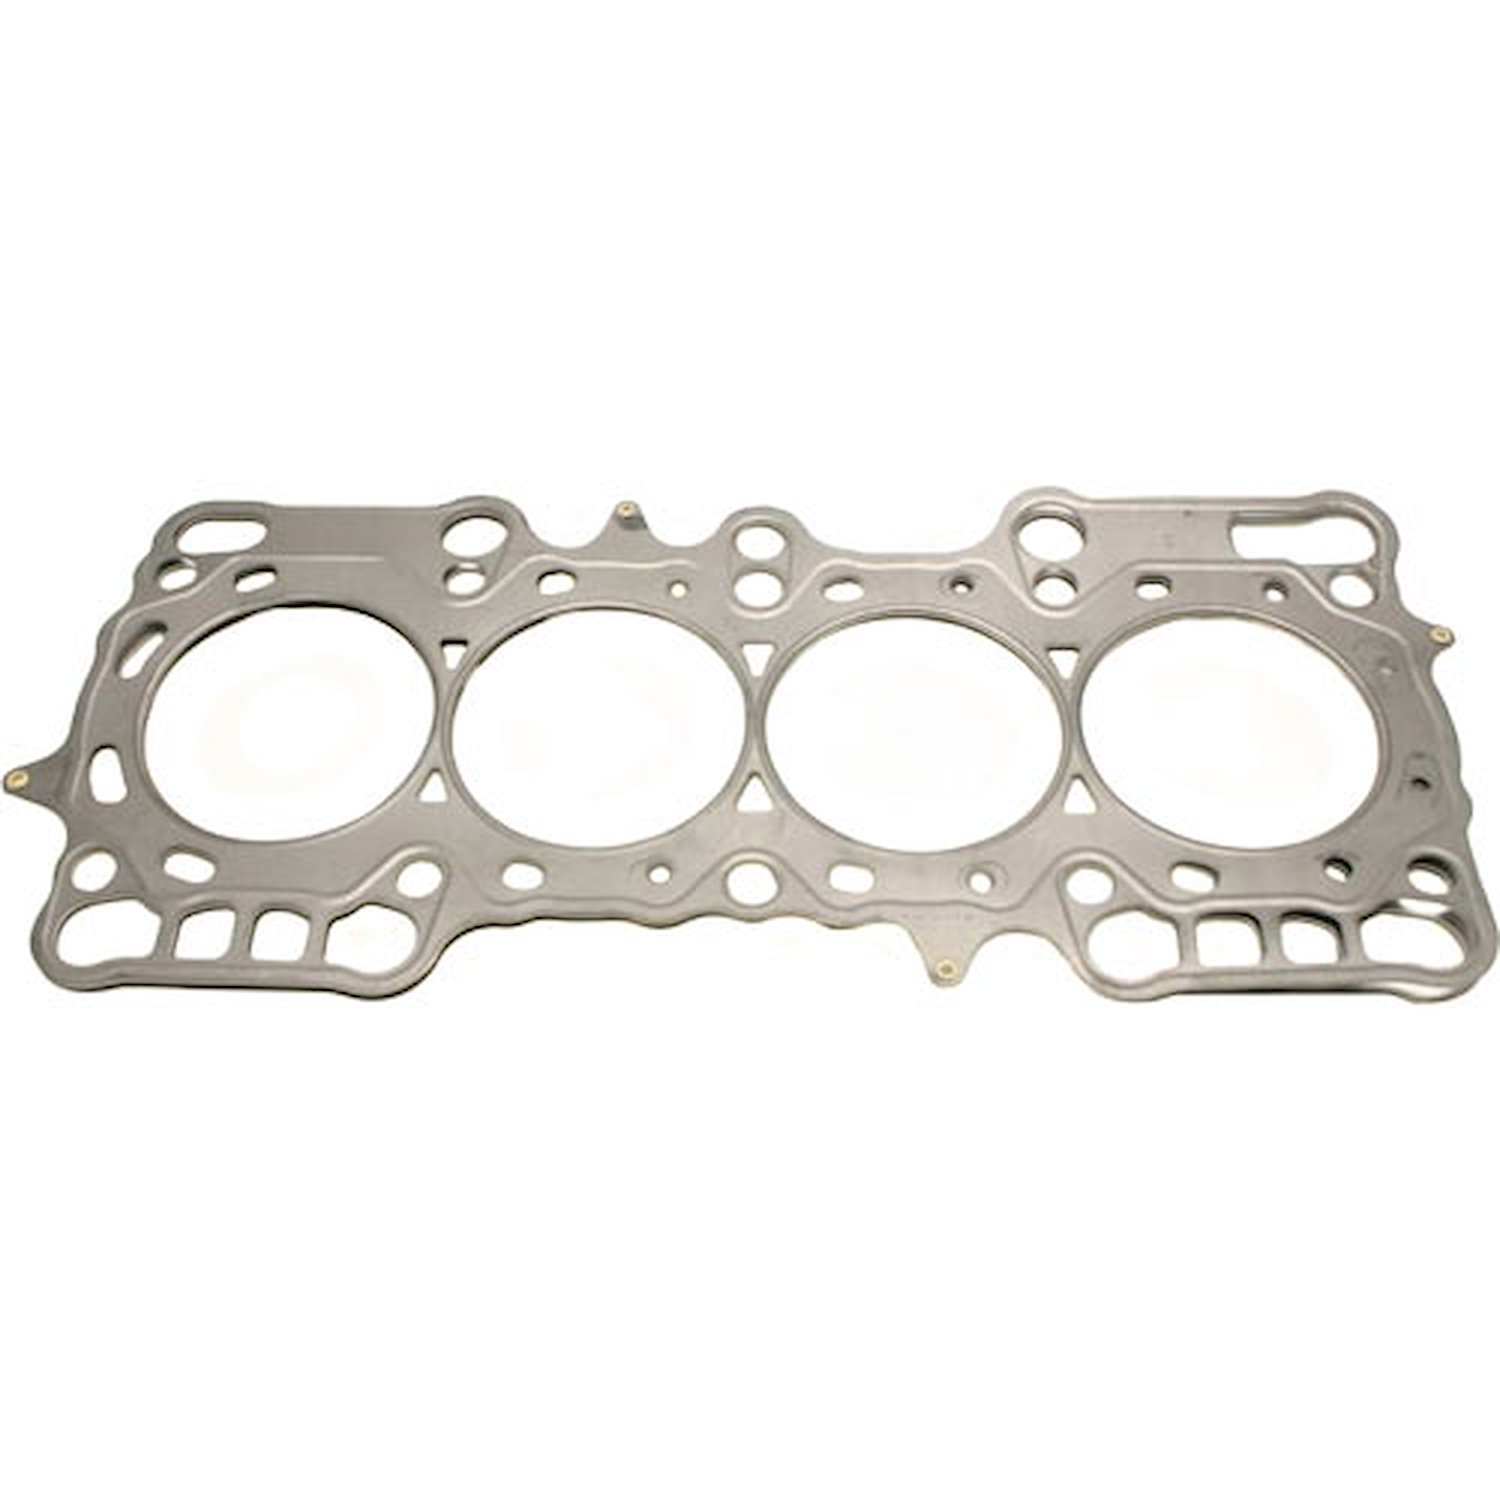 Head Gasket for 1993-1996 Honda Prelude with H22A1,